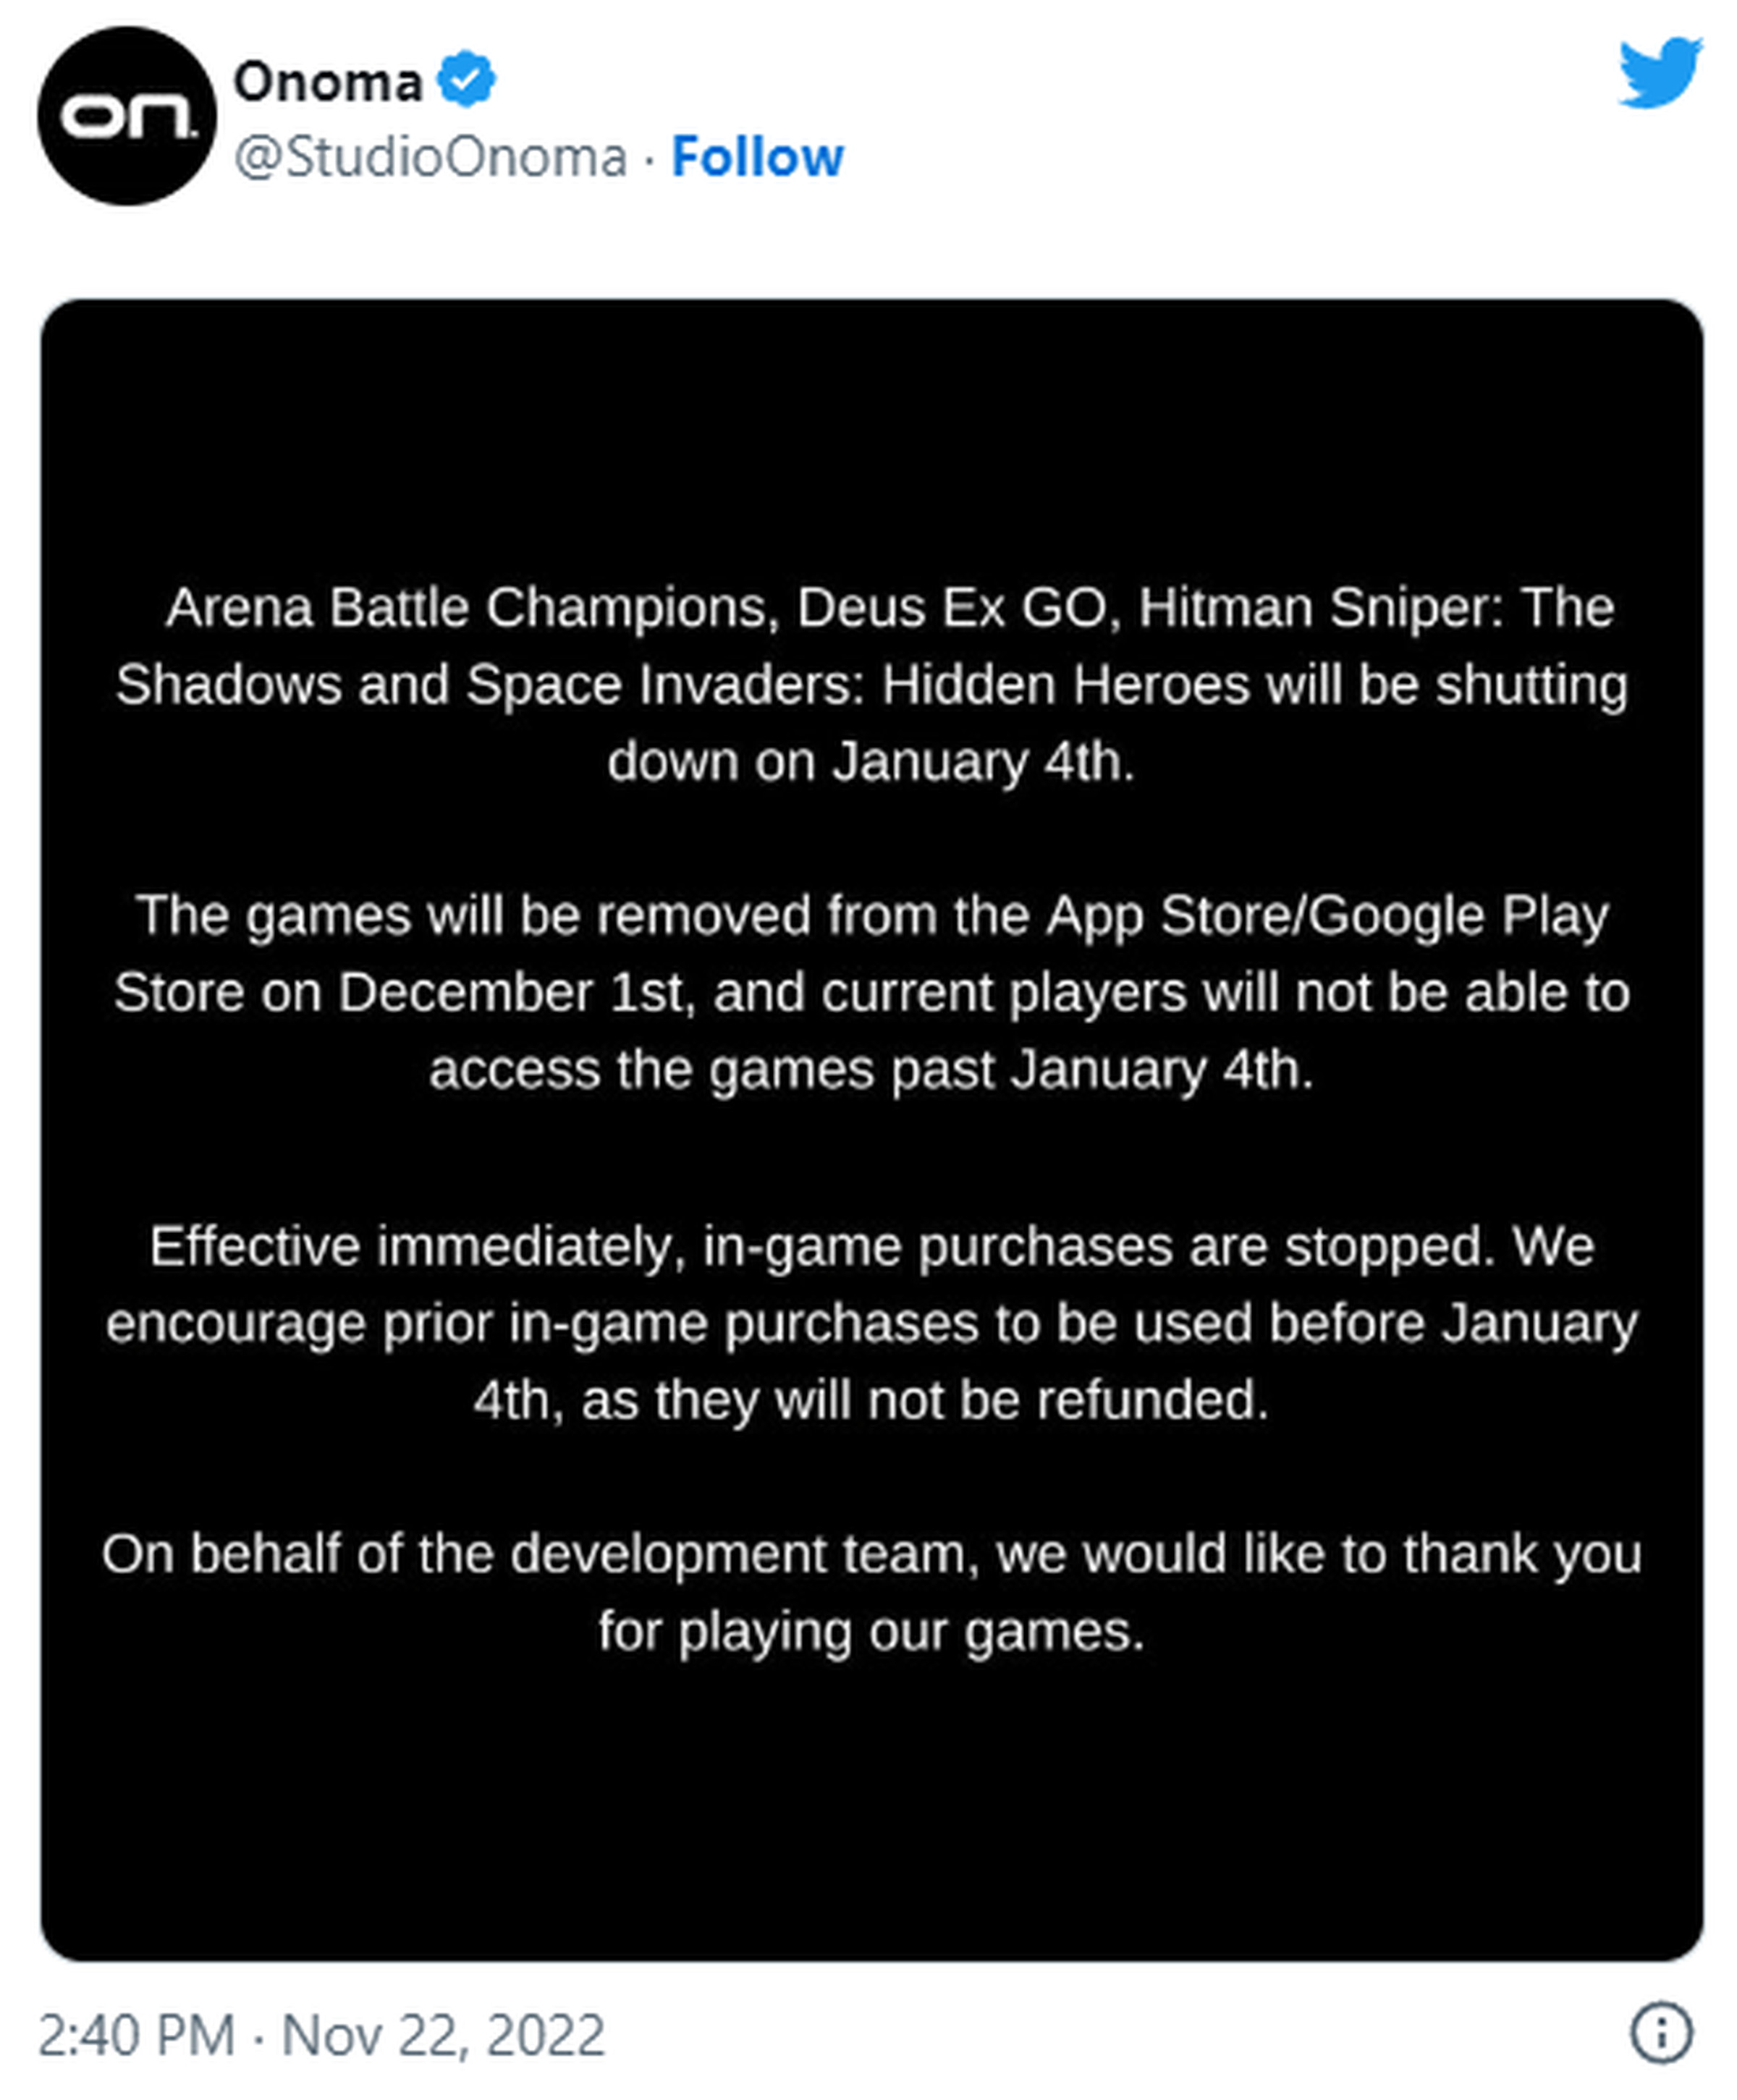 the tweet explains there will be no refunds for players and games will be shut down on January 4th